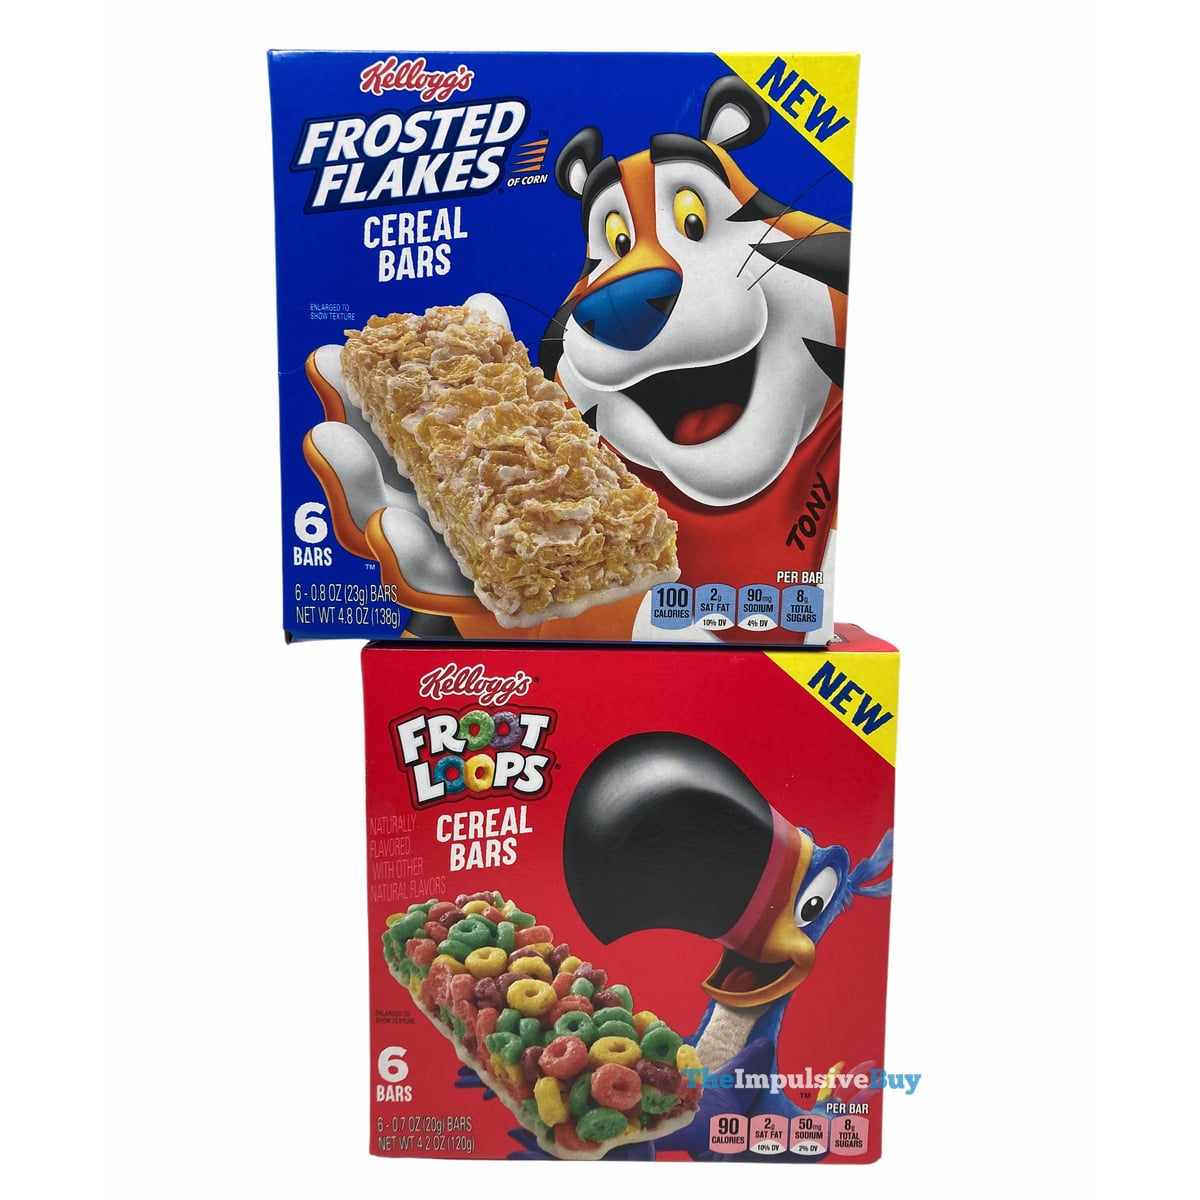 Kellogg's Frosted Flakes Cereal